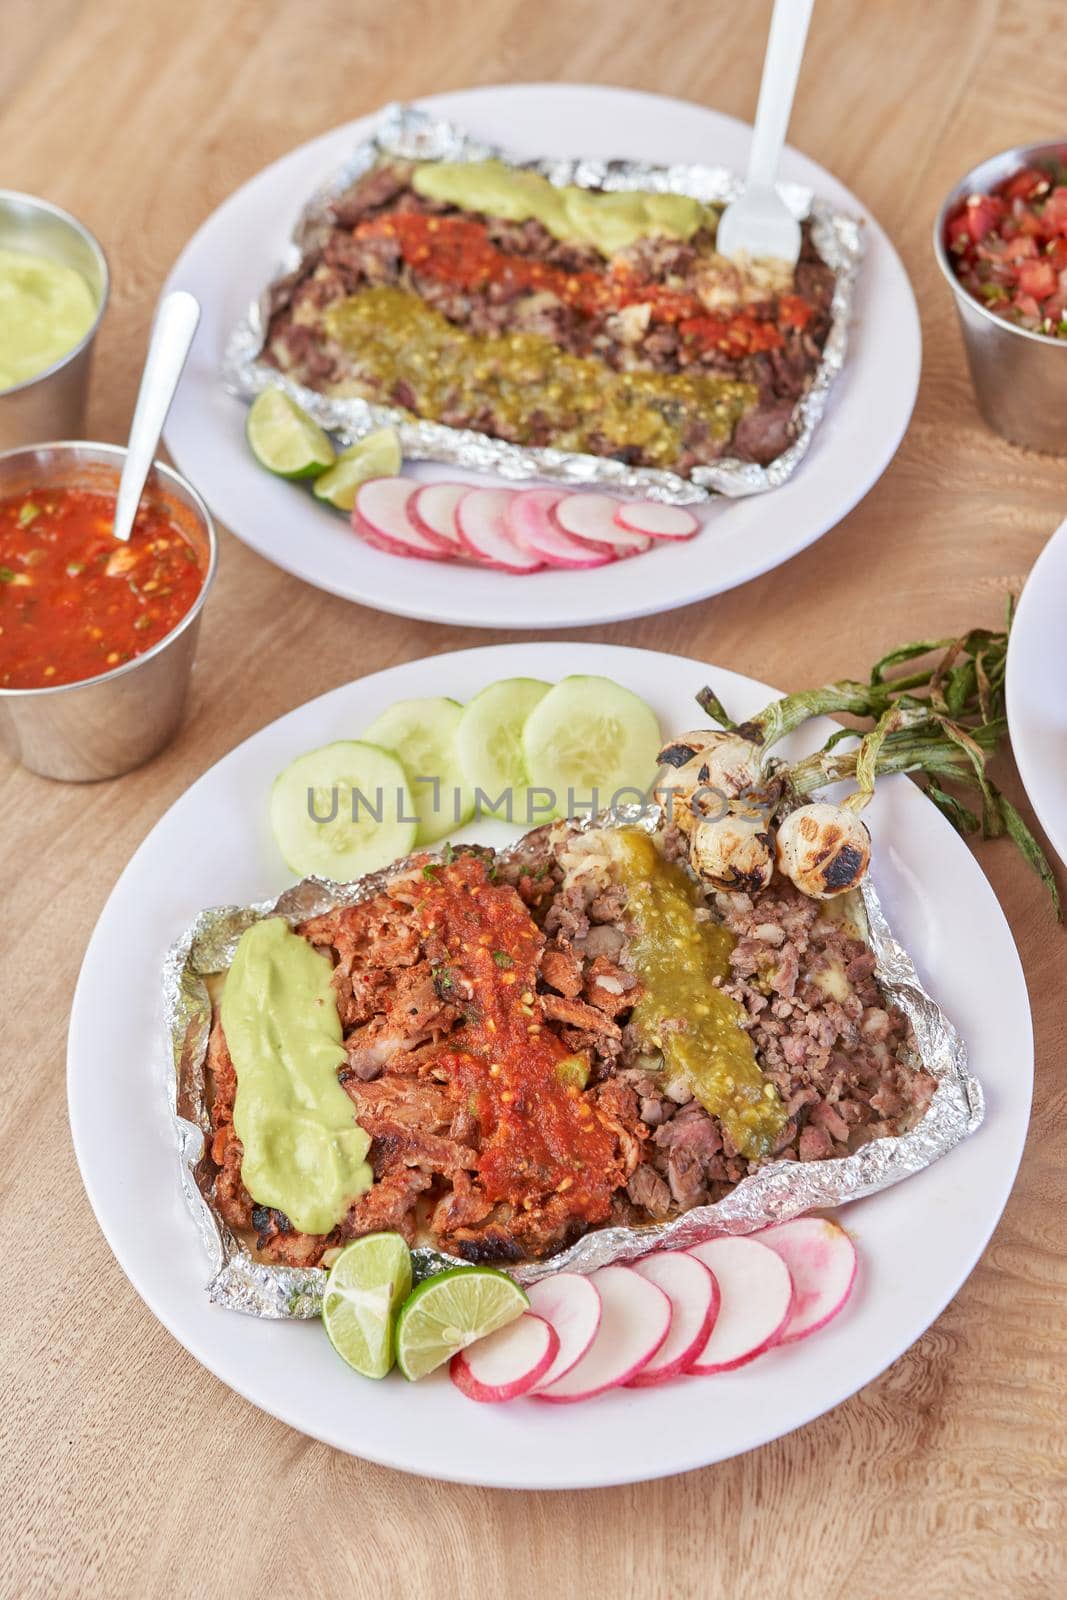 variety of delicious typical mexican food and ingredients such as salsas, red, green, guacamole, lemon, tomato and onion.